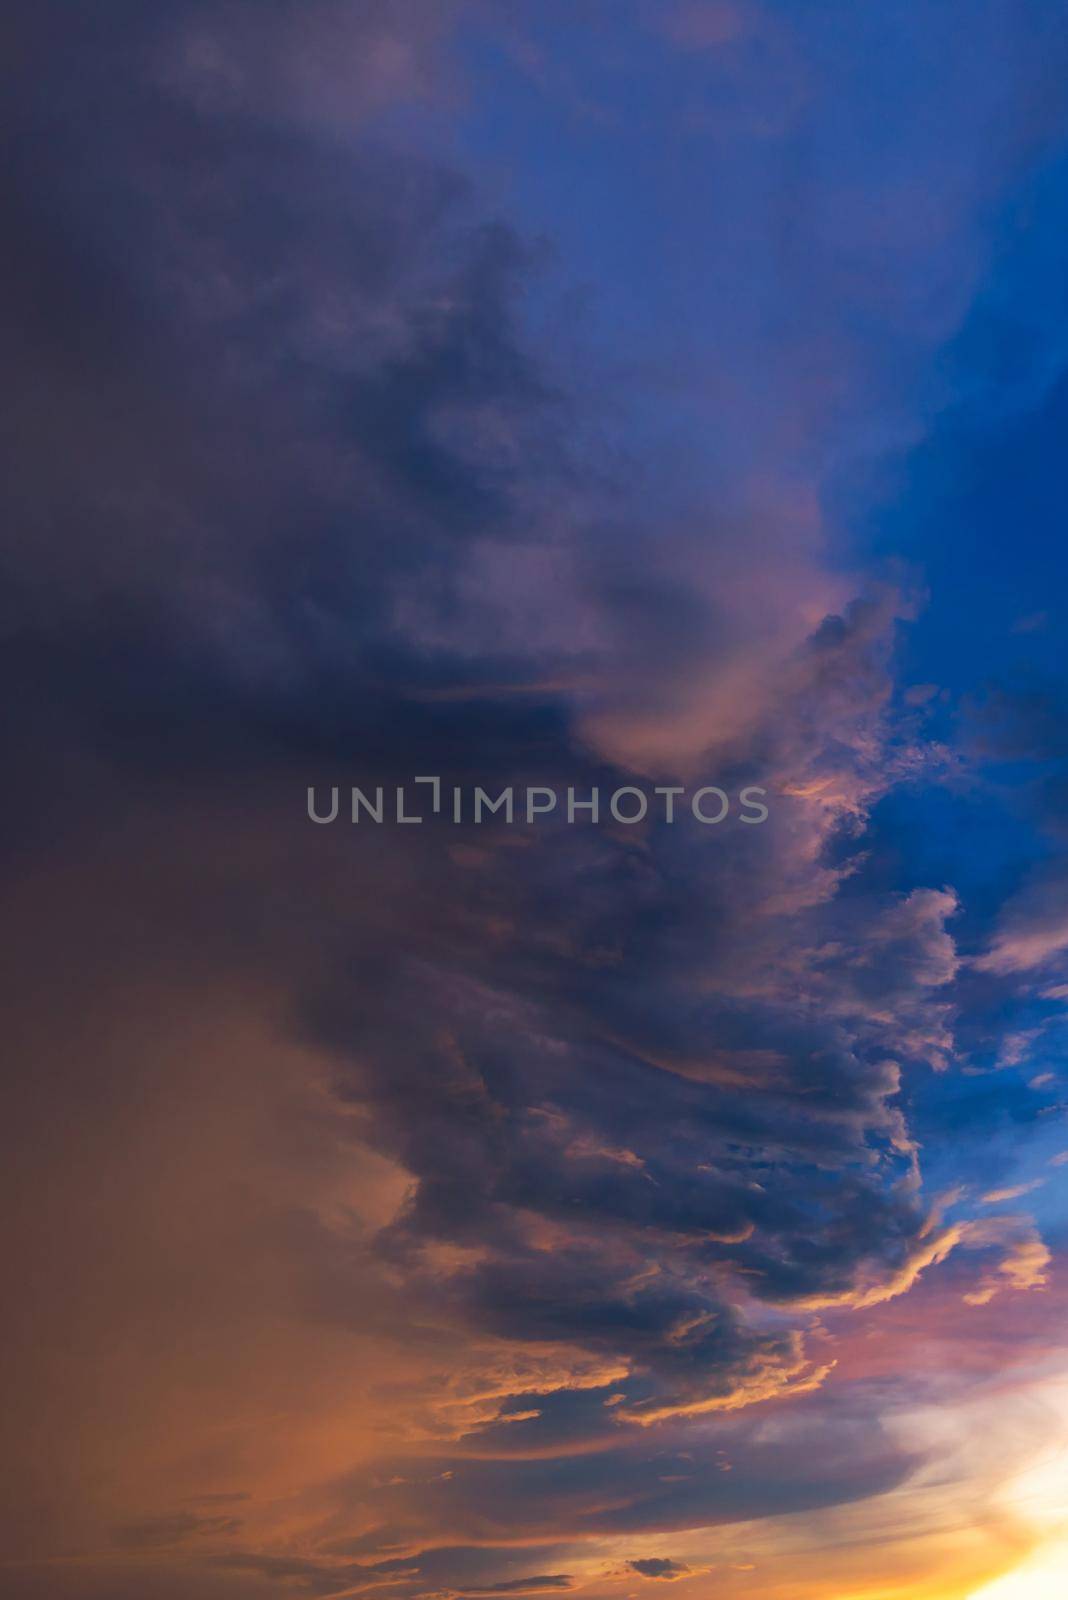 Dramatic sky with storm cloud before raining during sunset. by Nuamfolio